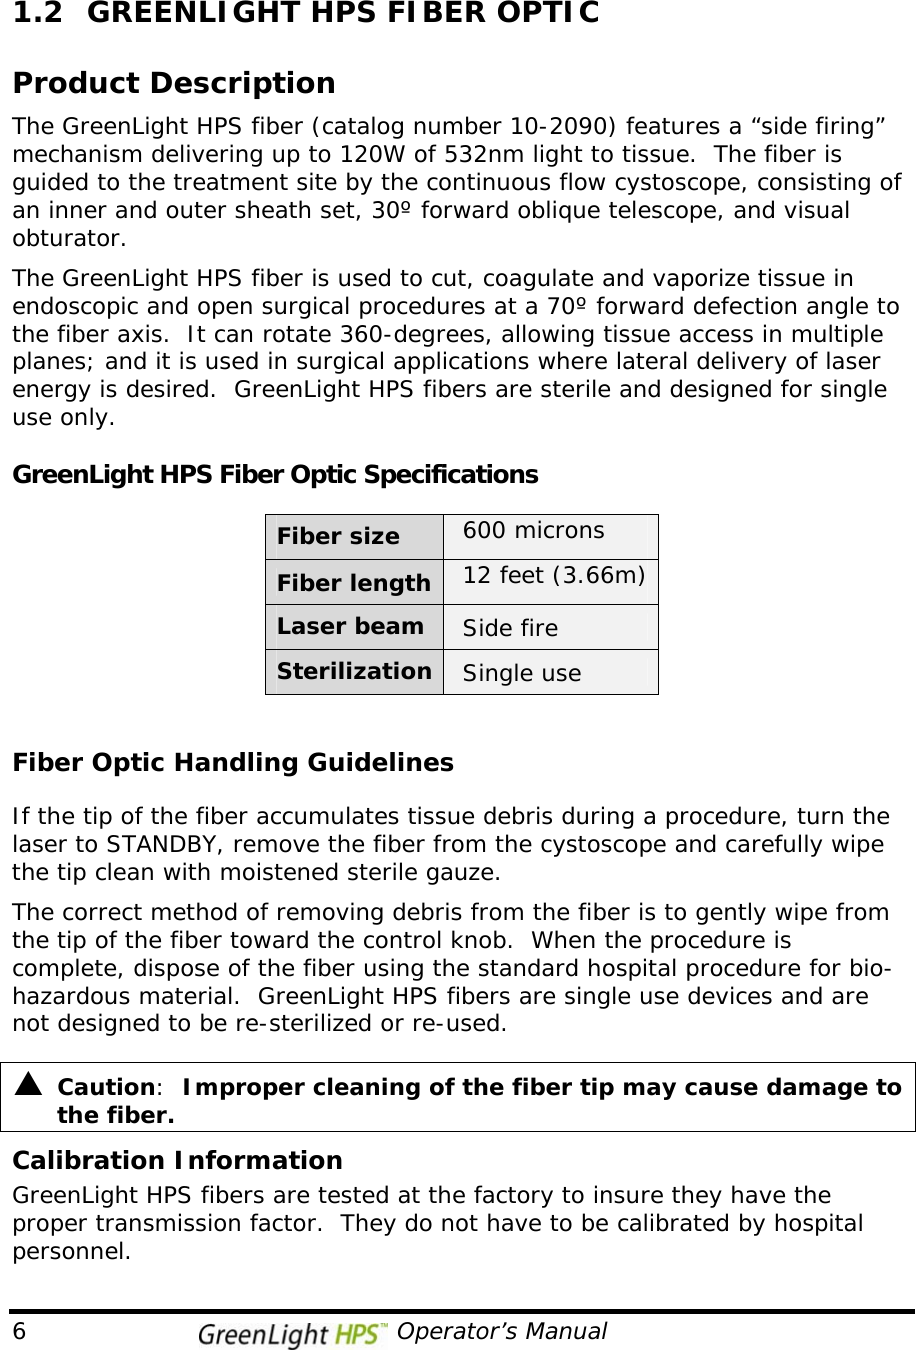  6                                              Operator’s Manual 1.2  GREENLIGHT HPS FIBER OPTIC   Product Description The GreenLight HPS fiber (catalog number 10-2090) features a “side firing” mechanism delivering up to 120W of 532nm light to tissue.  The fiber is guided to the treatment site by the continuous flow cystoscope, consisting of an inner and outer sheath set, 30º forward oblique telescope, and visual obturator.    The GreenLight HPS fiber is used to cut, coagulate and vaporize tissue in endoscopic and open surgical procedures at a 70º forward defection angle to the fiber axis.  It can rotate 360-degrees, allowing tissue access in multiple planes; and it is used in surgical applications where lateral delivery of laser energy is desired.  GreenLight HPS fibers are sterile and designed for single use only.  GreenLight HPS Fiber Optic Specifications        Fiber size  600 microns  Fiber length 12 feet (3.66m)  Laser beam  Side fire Sterilization  Single use   Fiber Optic Handling Guidelines  If the tip of the fiber accumulates tissue debris during a procedure, turn the laser to STANDBY, remove the fiber from the cystoscope and carefully wipe the tip clean with moistened sterile gauze.   The correct method of removing debris from the fiber is to gently wipe from the tip of the fiber toward the control knob.  When the procedure is complete, dispose of the fiber using the standard hospital procedure for bio-hazardous material.  GreenLight HPS fibers are single use devices and are not designed to be re-sterilized or re-used.  S  Caution:  Improper cleaning of the fiber tip may cause damage to the fiber. Calibration Information GreenLight HPS fibers are tested at the factory to insure they have the proper transmission factor.  They do not have to be calibrated by hospital personnel. 